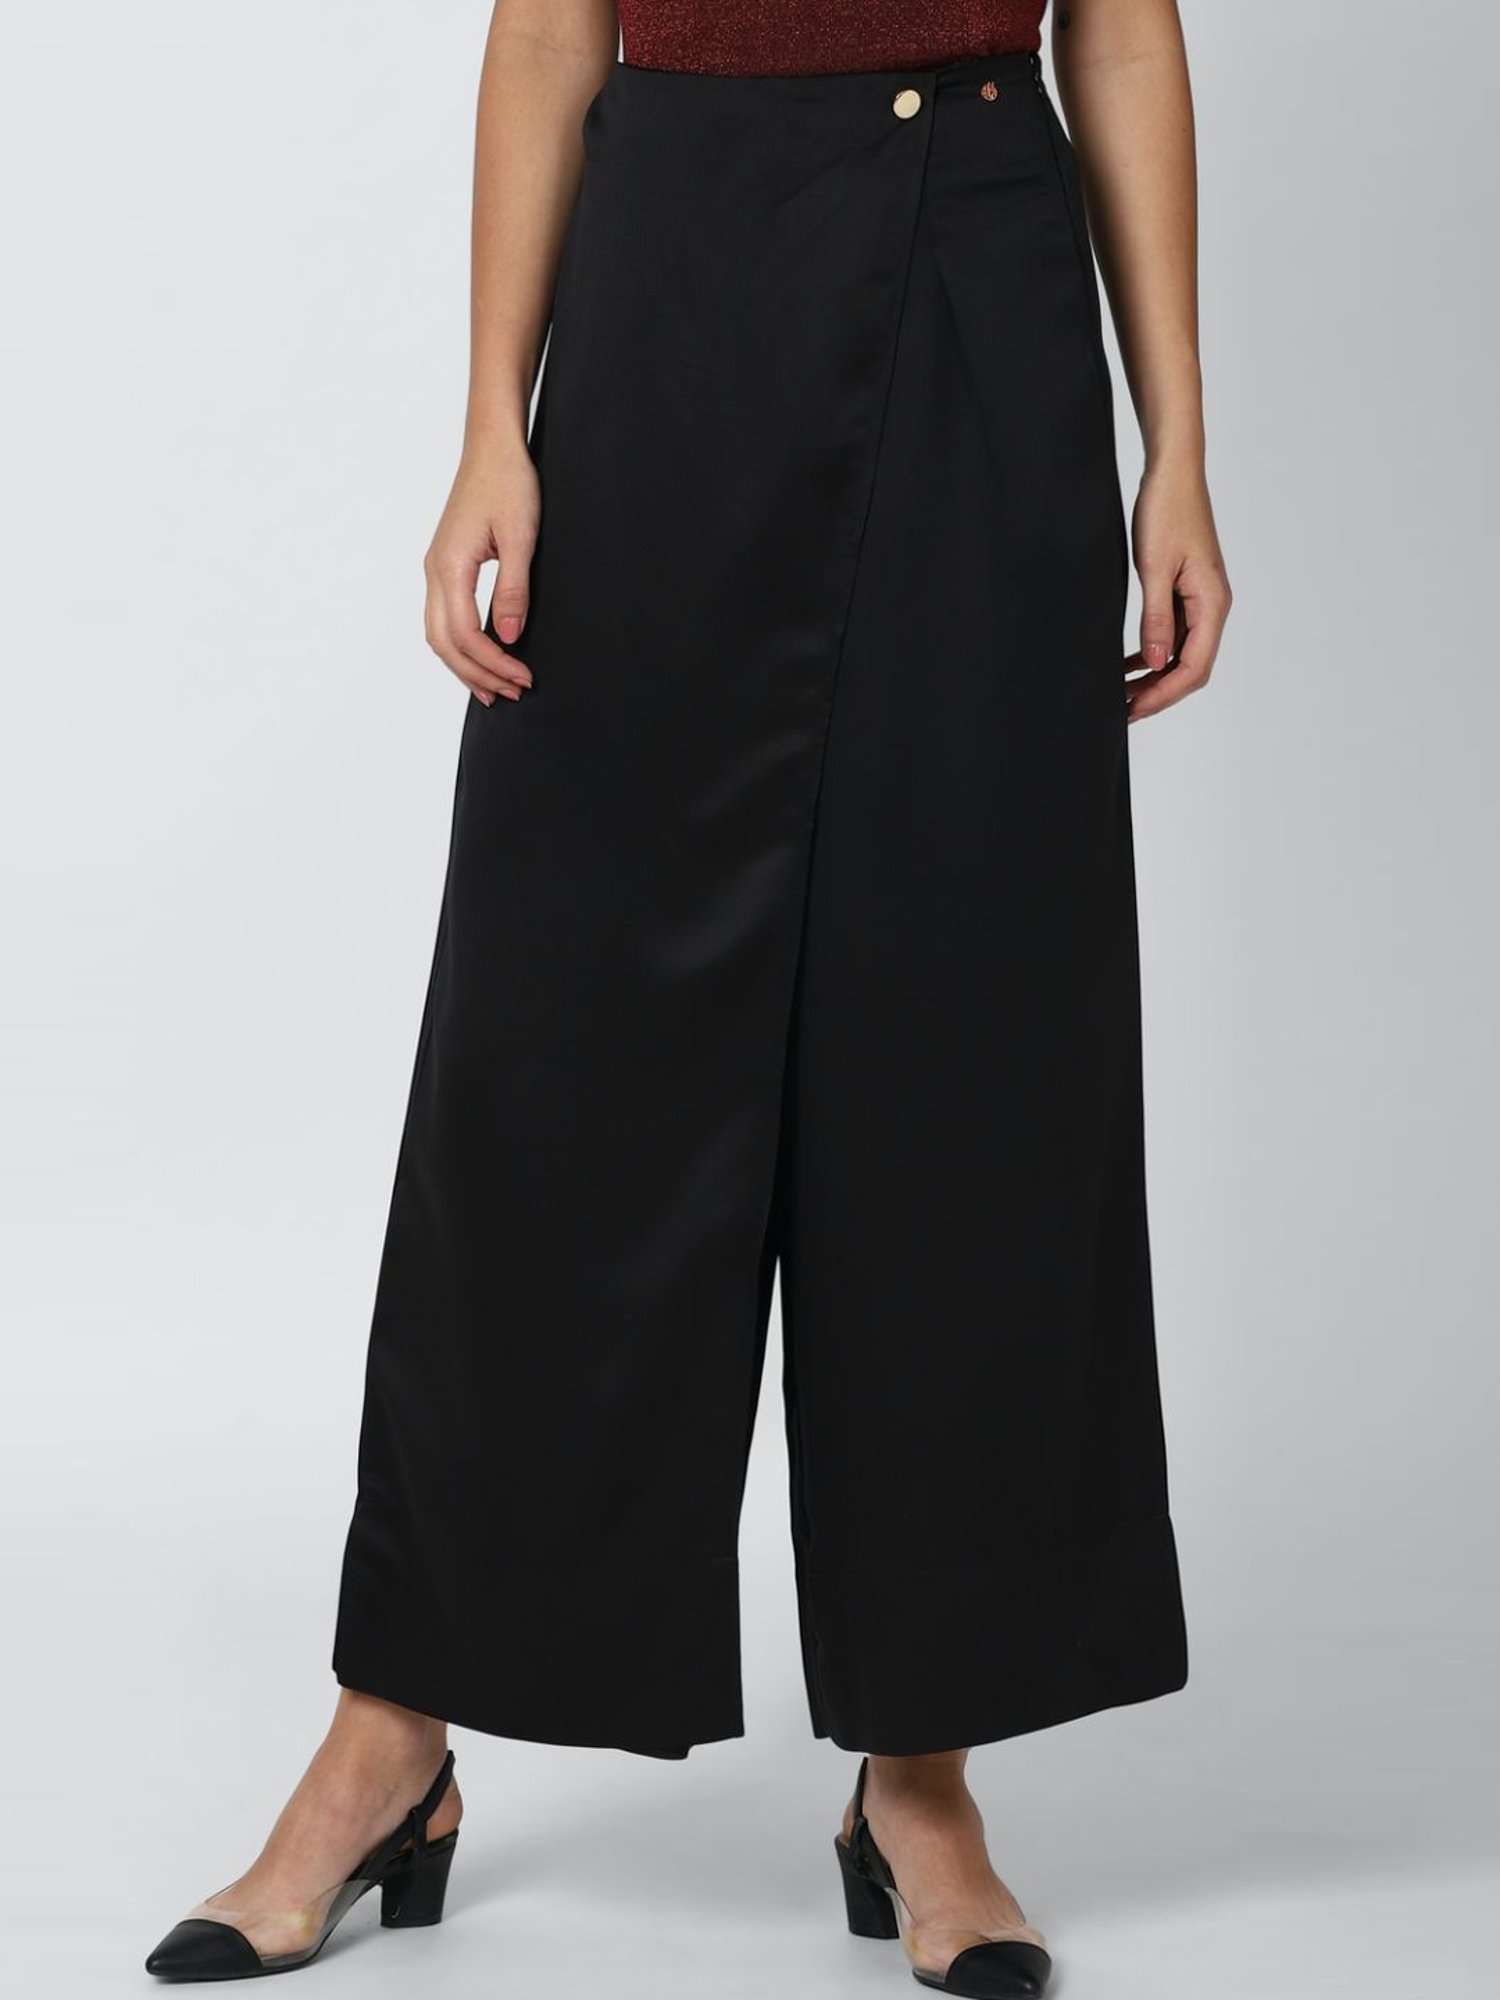 Plus Black Super Belted Trouser  Plus Size  PrettyLittleThing